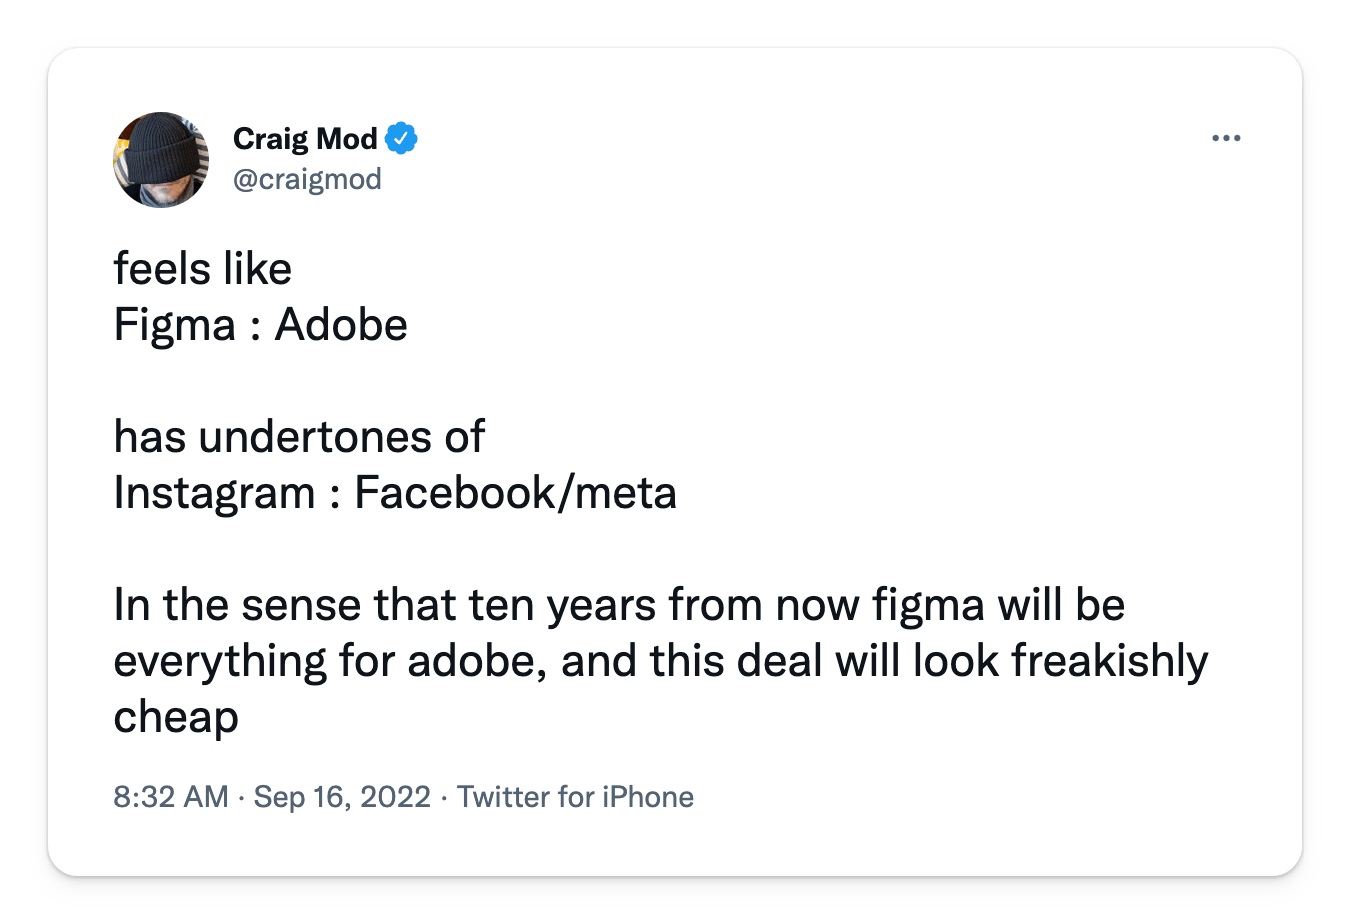 Tweet from @craigmod: “feels like Figma : Adobe has undertones of Instagram : Facebook/meta In the sense that ten years from now figma will be everything for adobe, and this deal will look freakishly cheap”